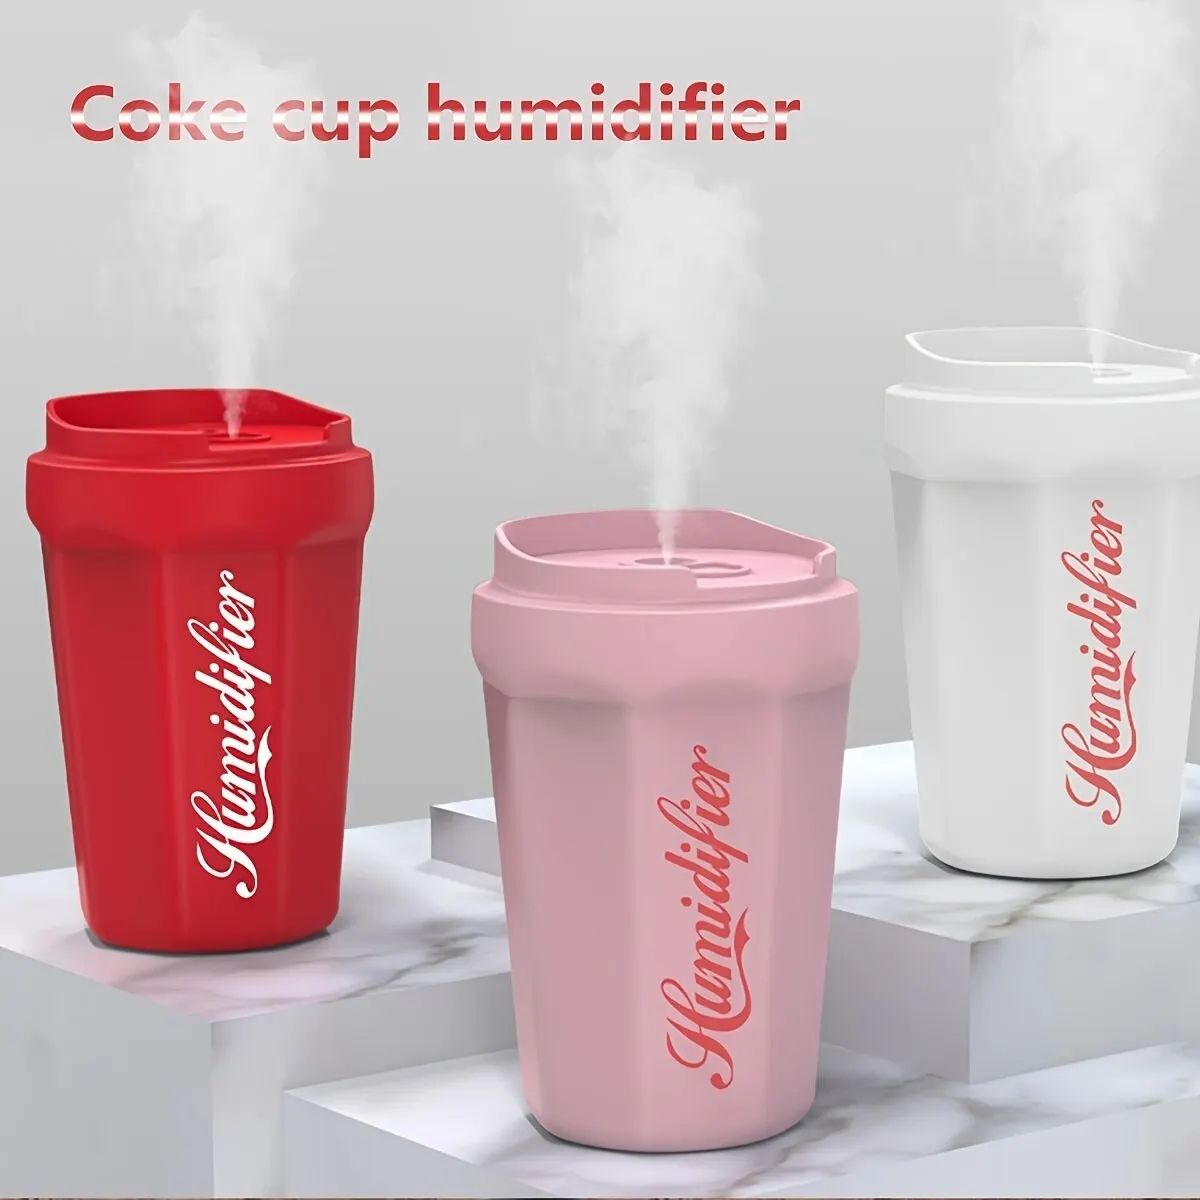 X30 Coke Cup Humidifier Car Home USB Aroma Diffuser Summer Hydrating Portable Cool Mist Bedroom Study Room Mini Humidifier